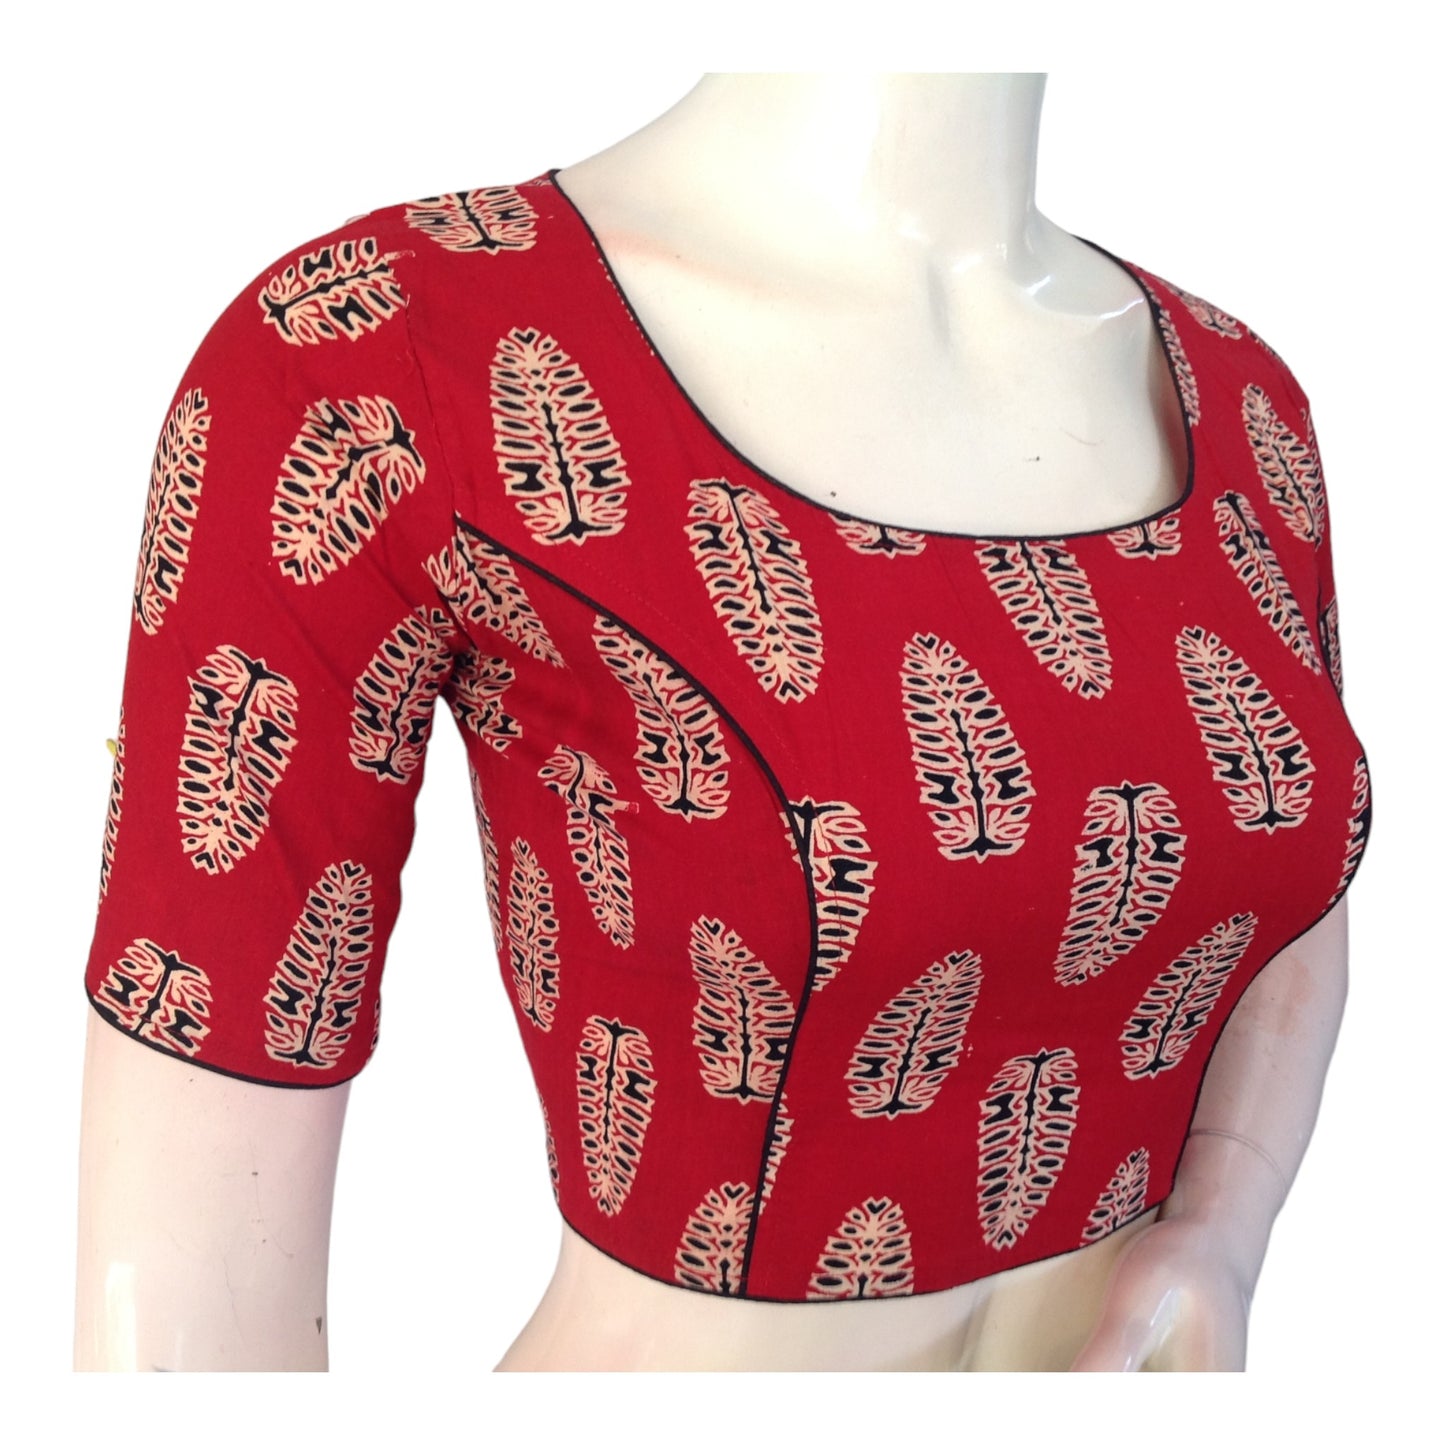 Festive Red High Neck Saree Blouse | Premium Cotton | Handcrafted in India